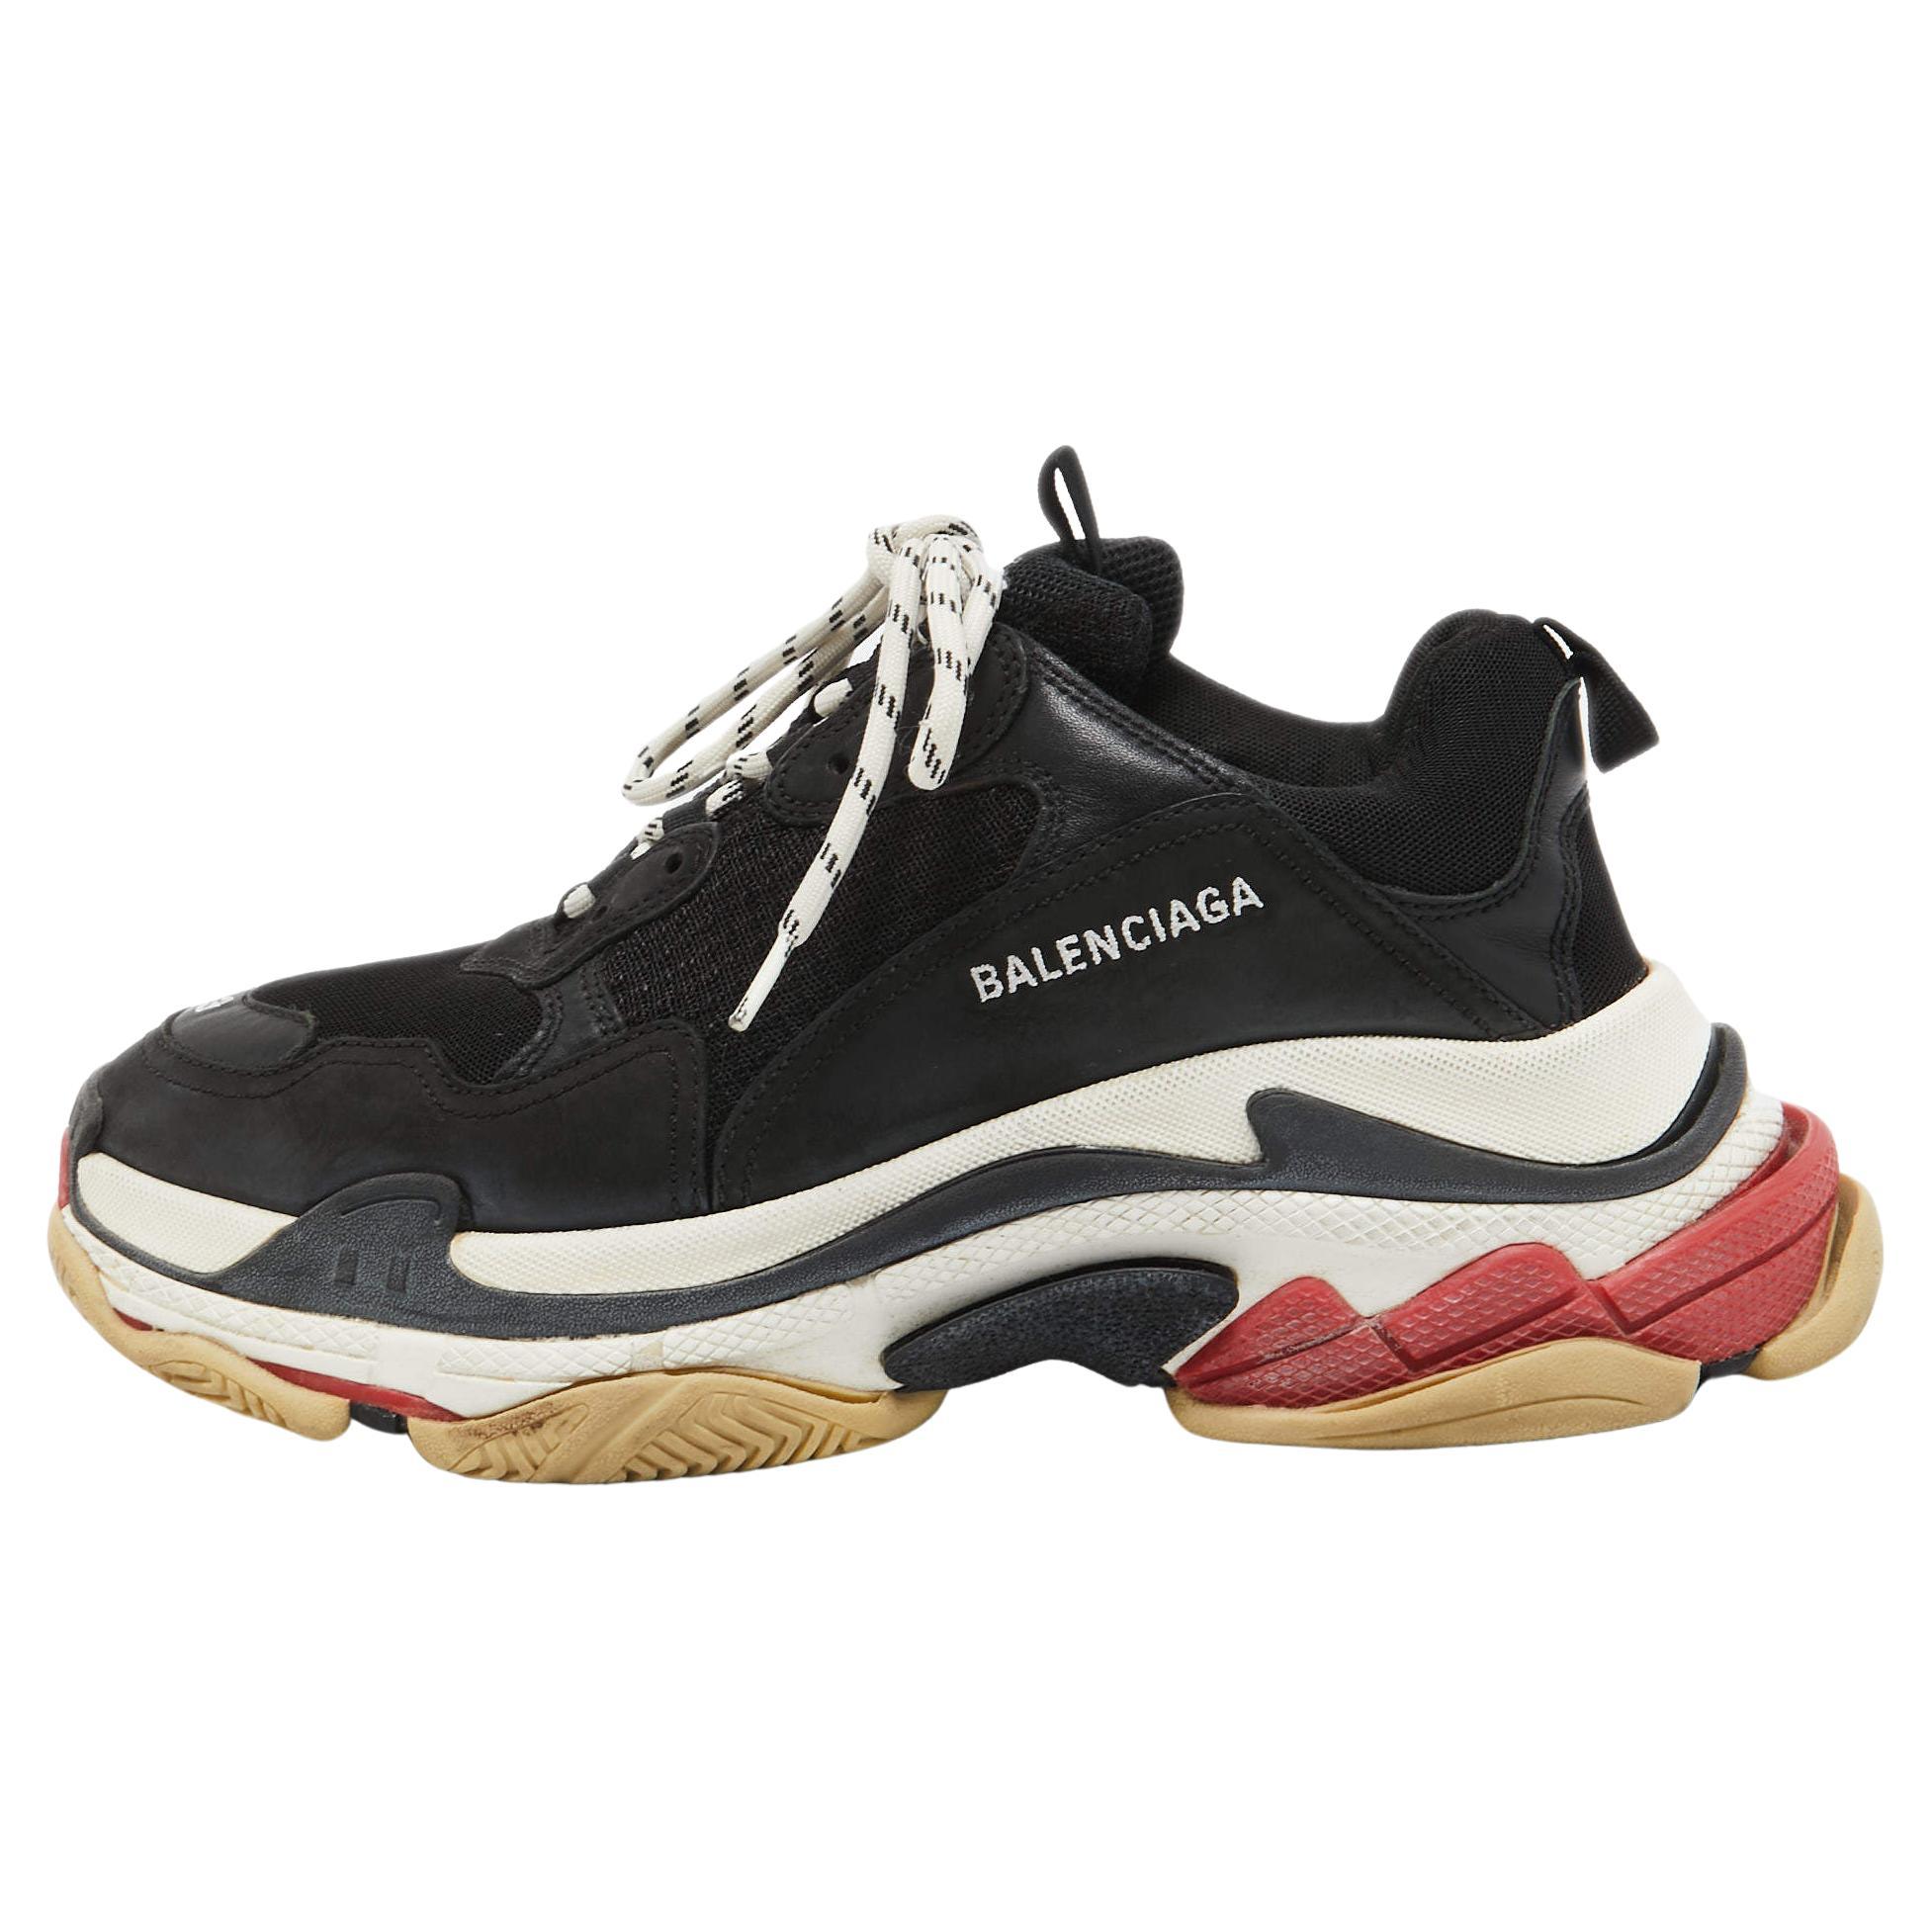 Balenciaga Black Leather and Mesh Triple S Sneakers Size 43